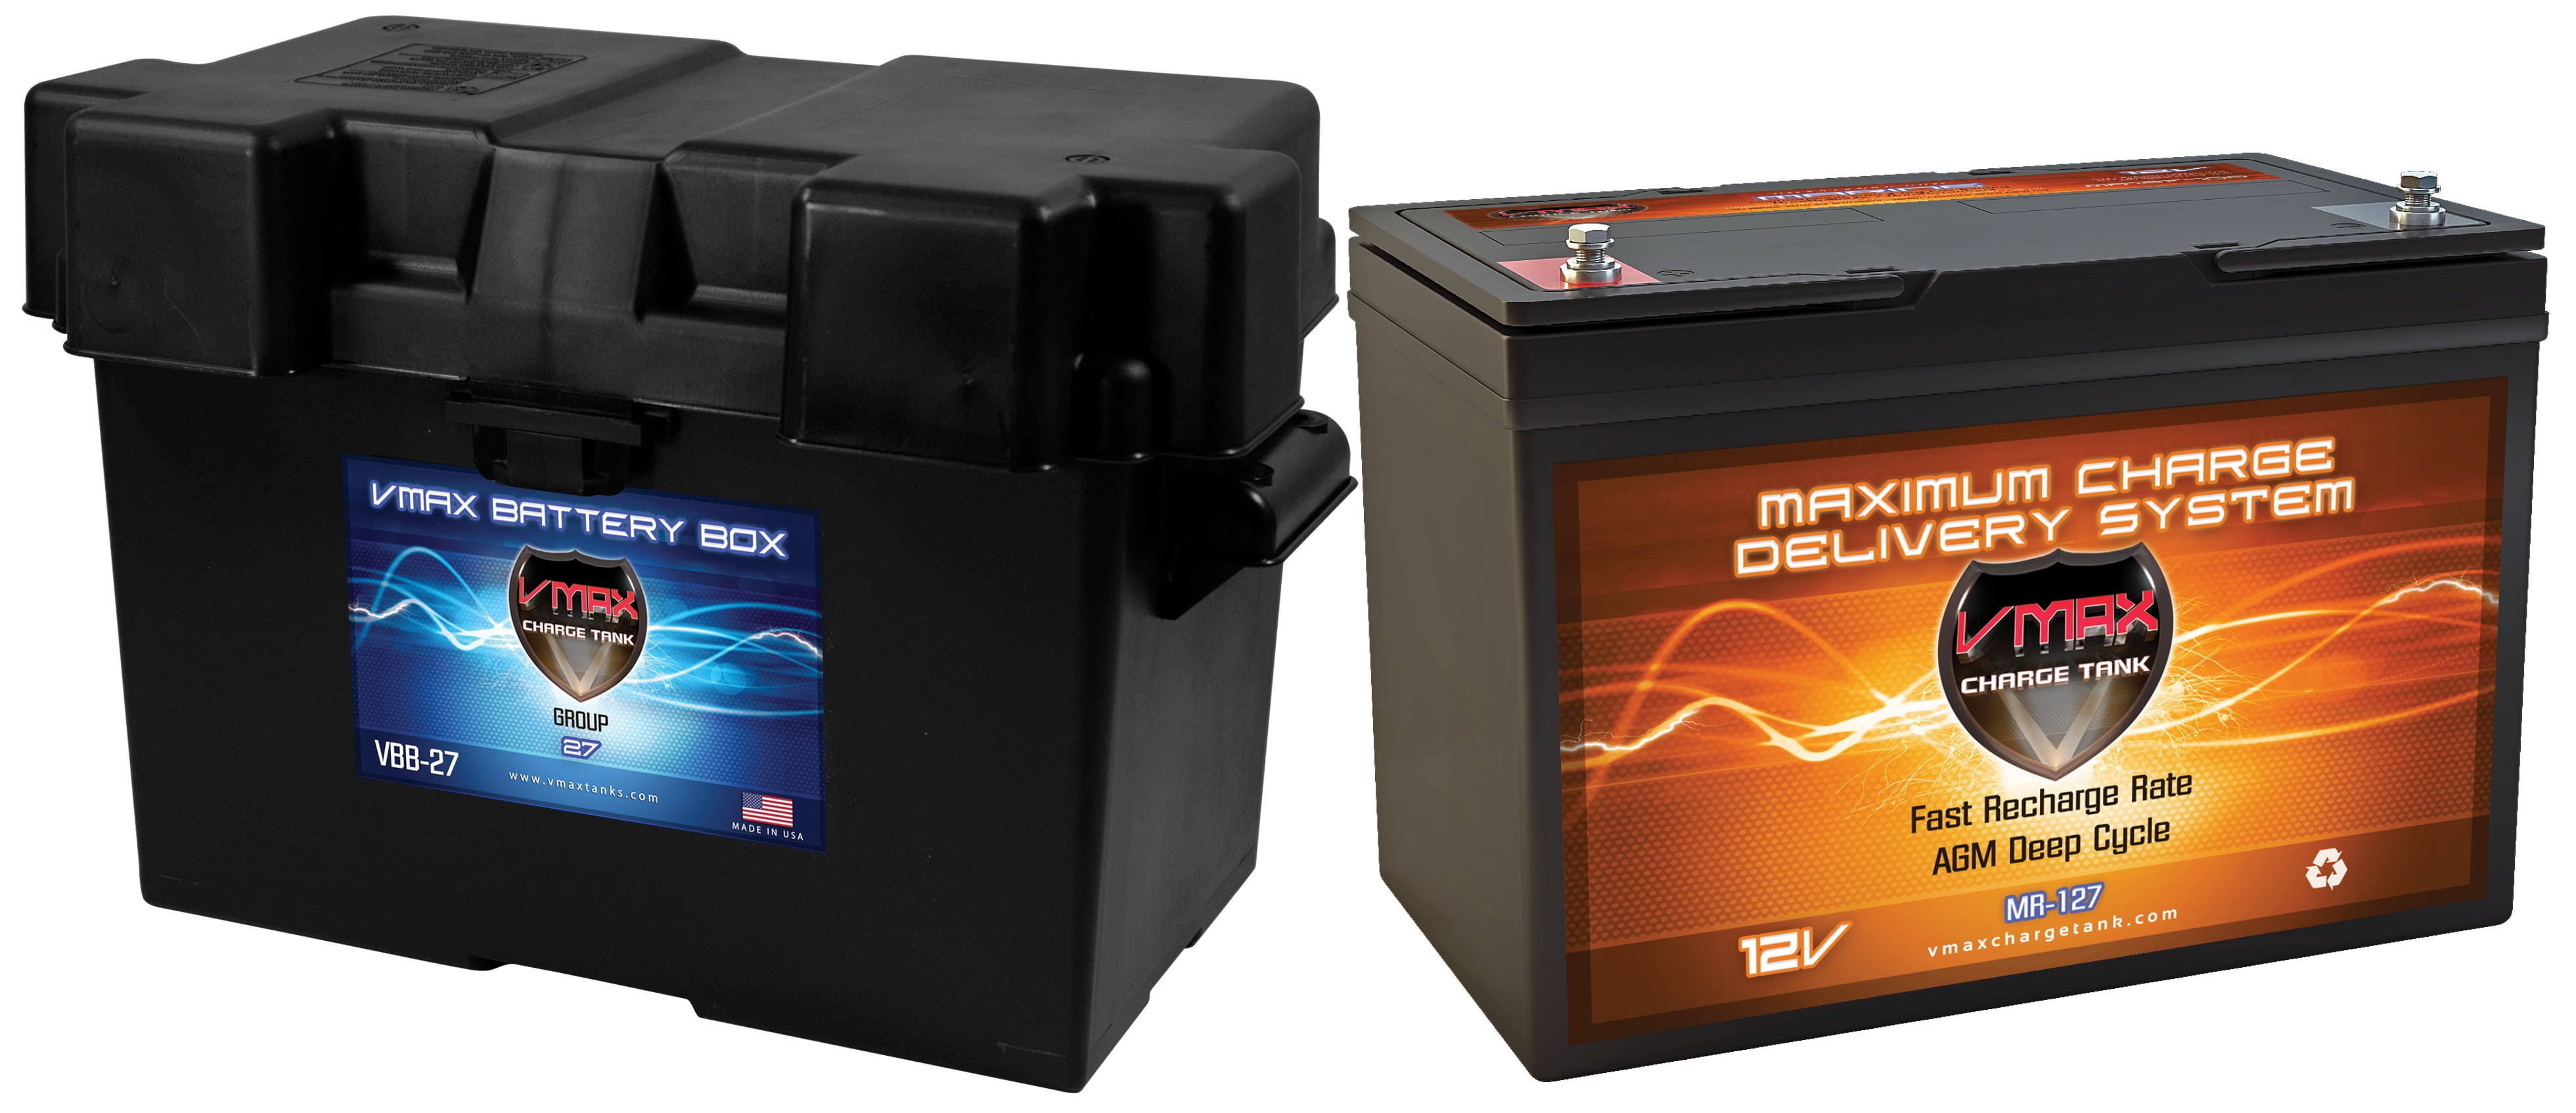 VMAX MR127-100 + Marine Box Deep Cycle Battery Replaces SEARS 96410 12 Volt 100Ah AGM Group 27